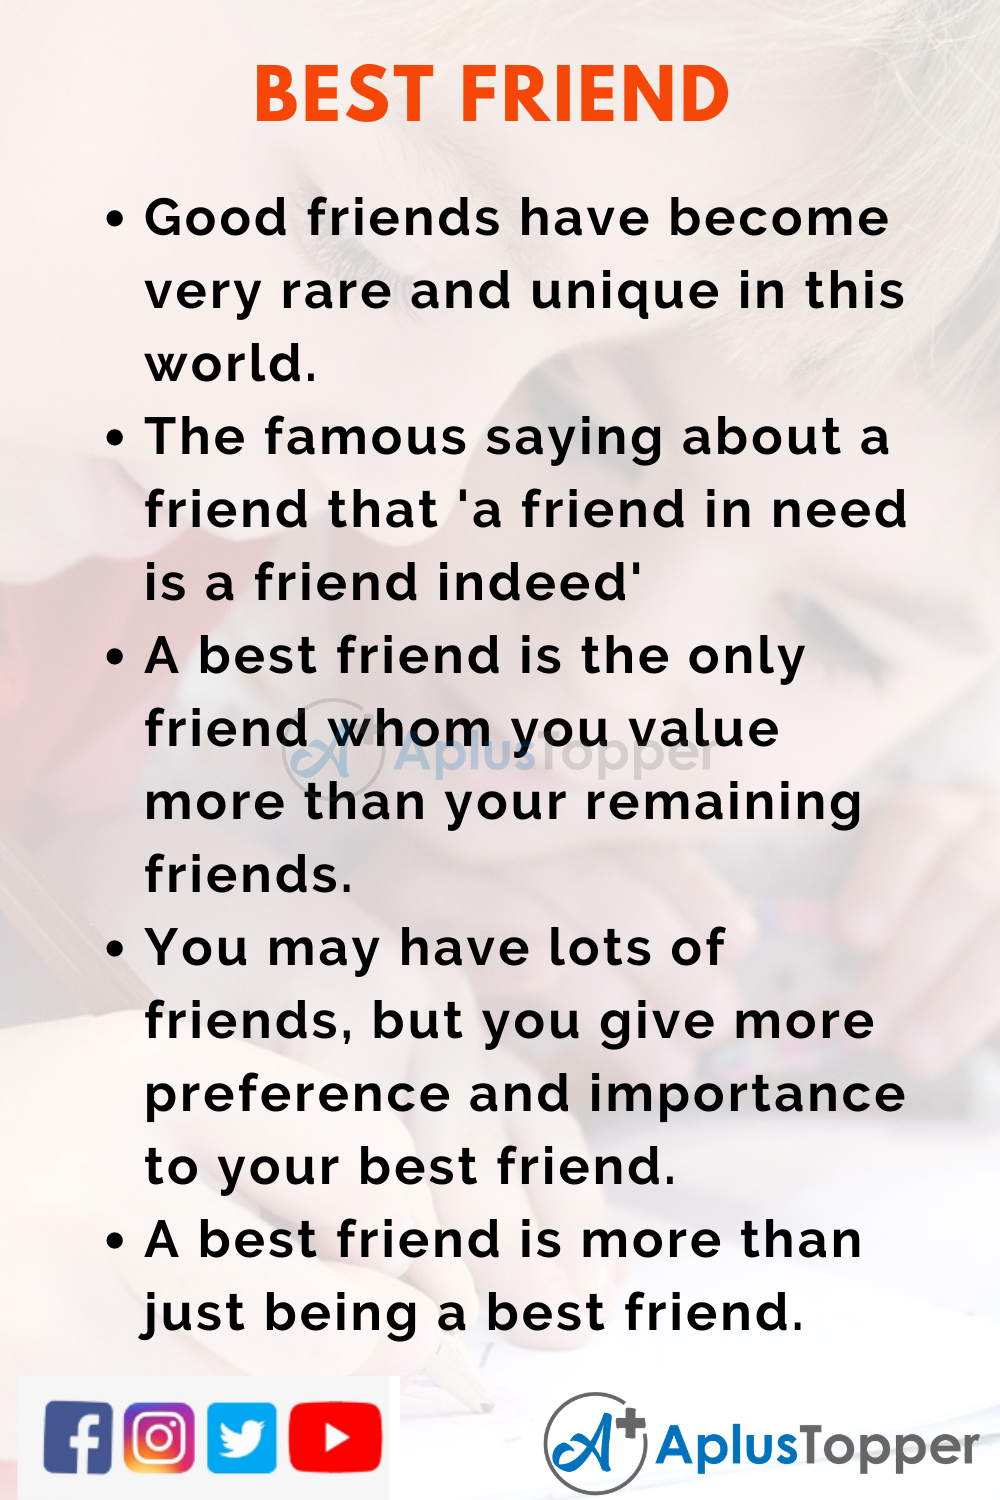 10 Lines on Best Friend for Students and Children in English - A ...